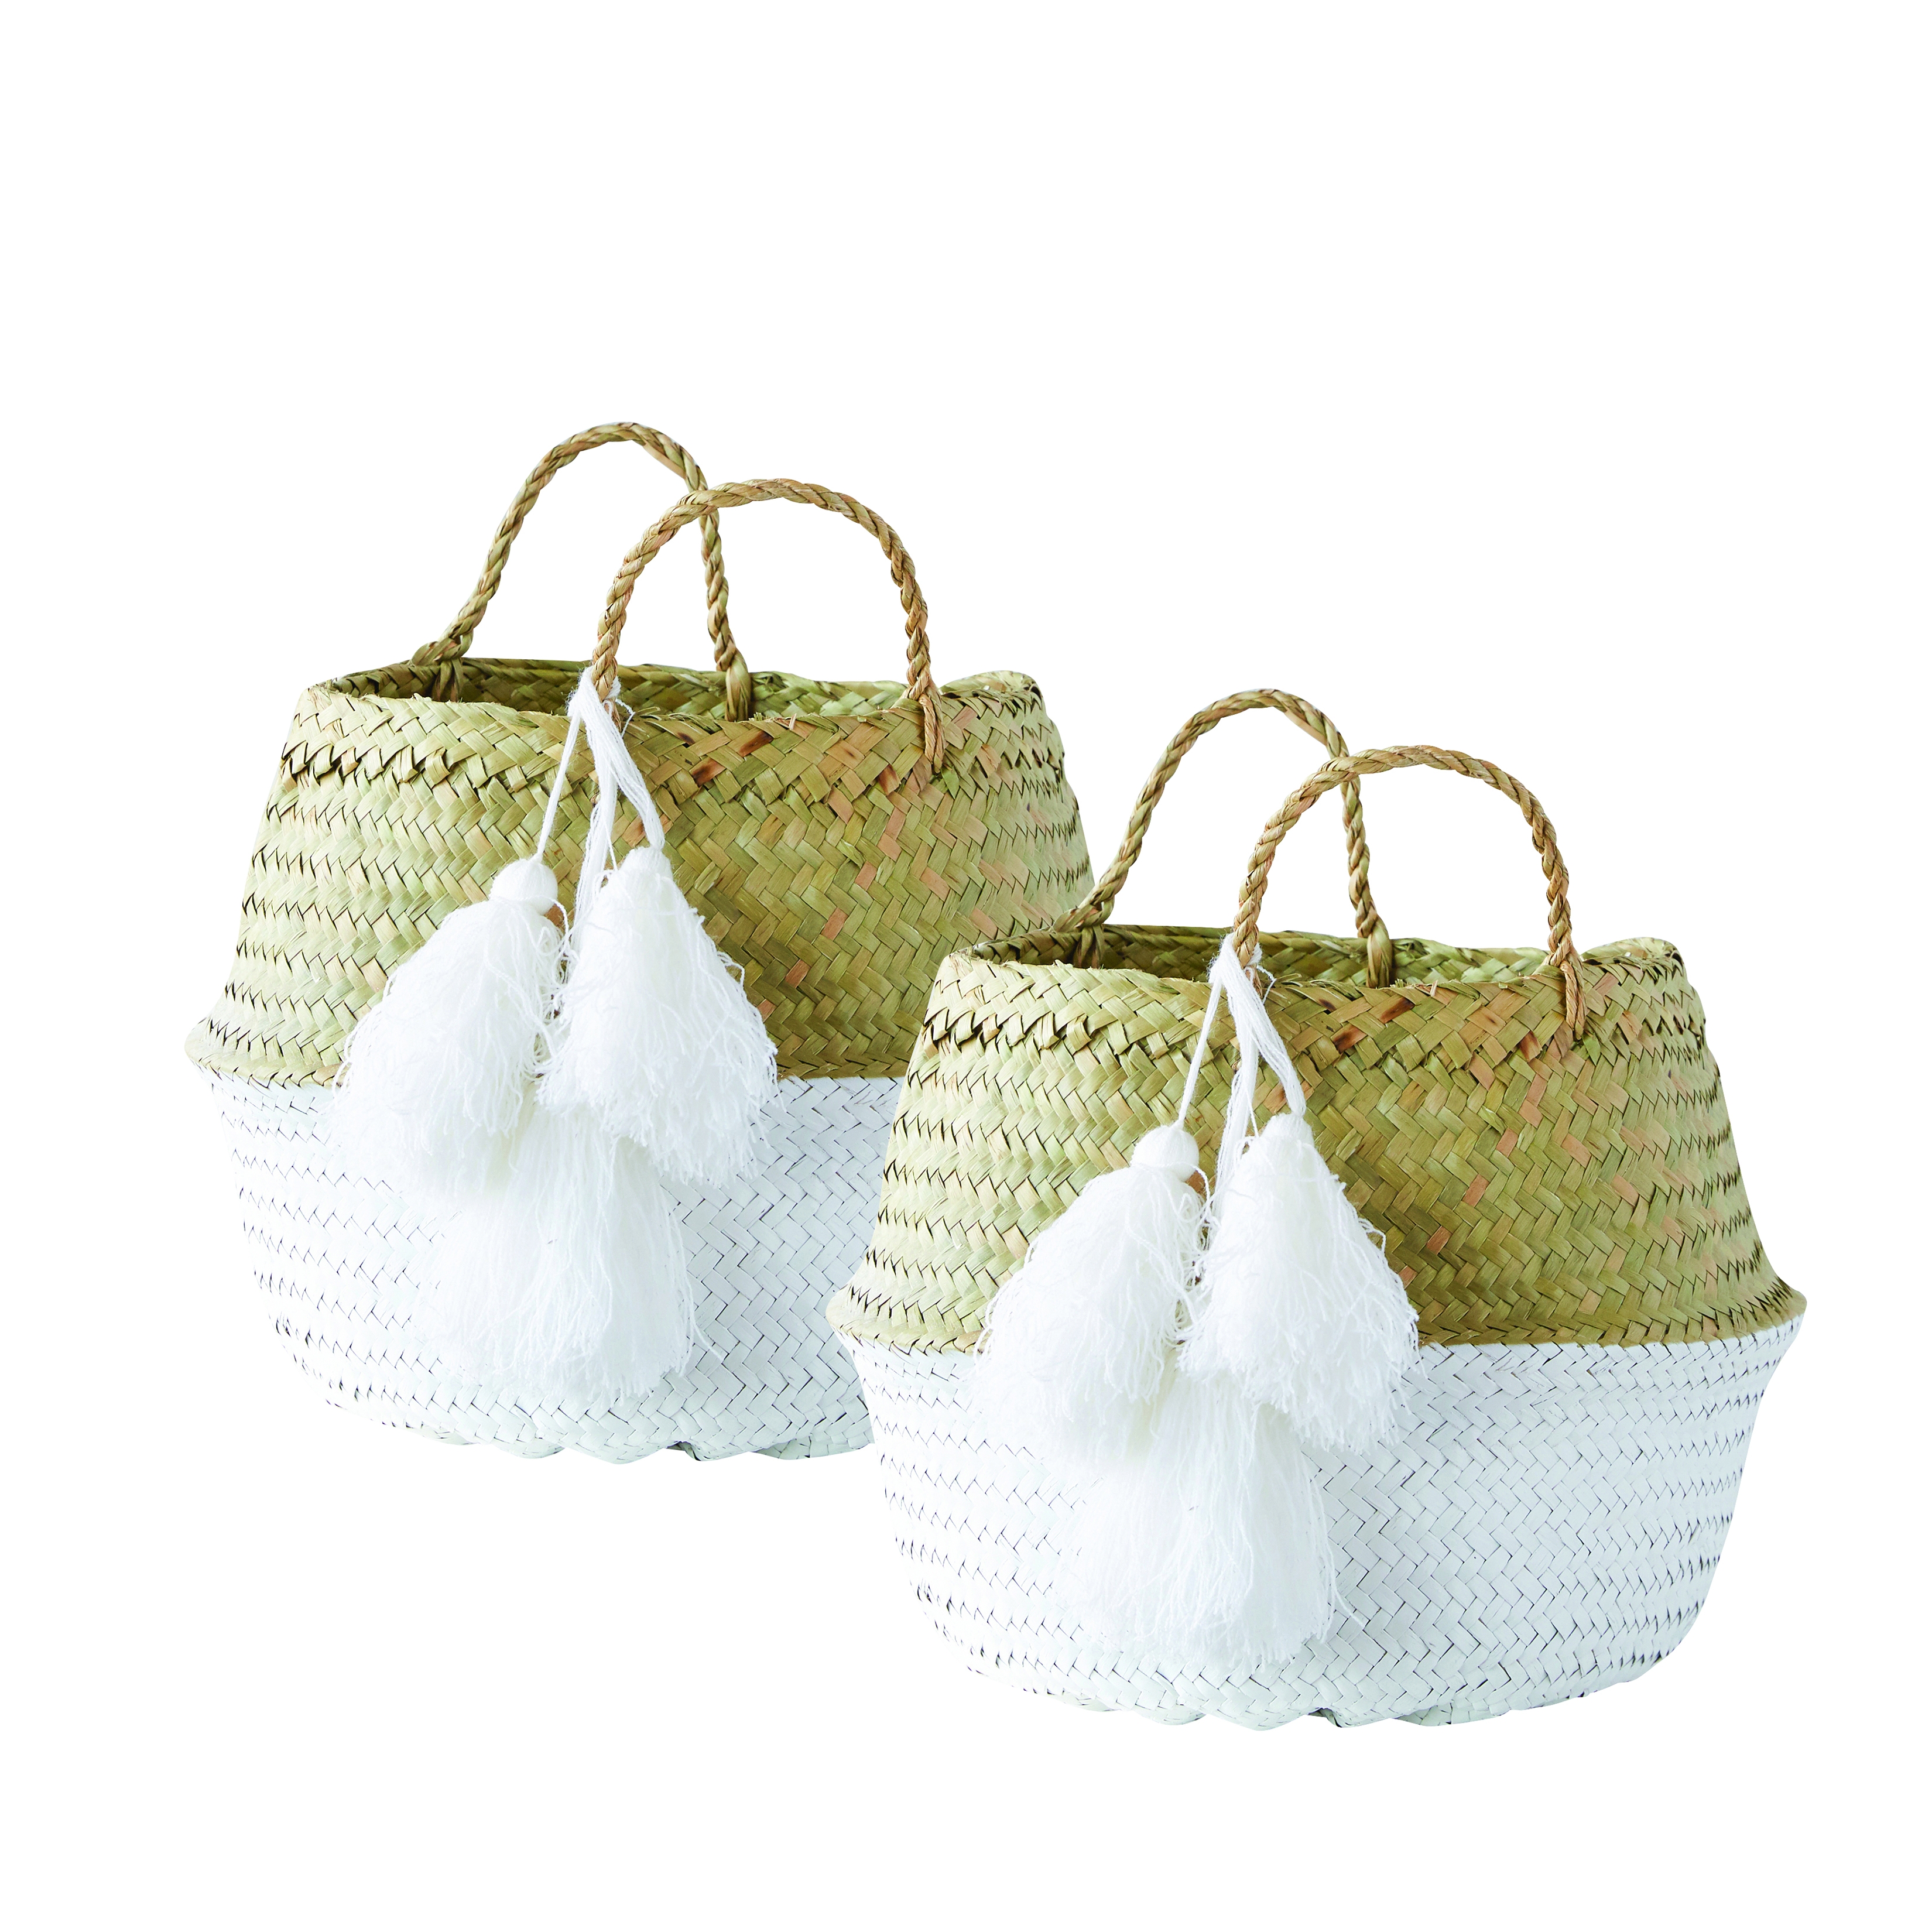 Beige & White Collapsible Palm Leaf Baskets with Large Tassels (Set of 2 Sizes) - Image 0